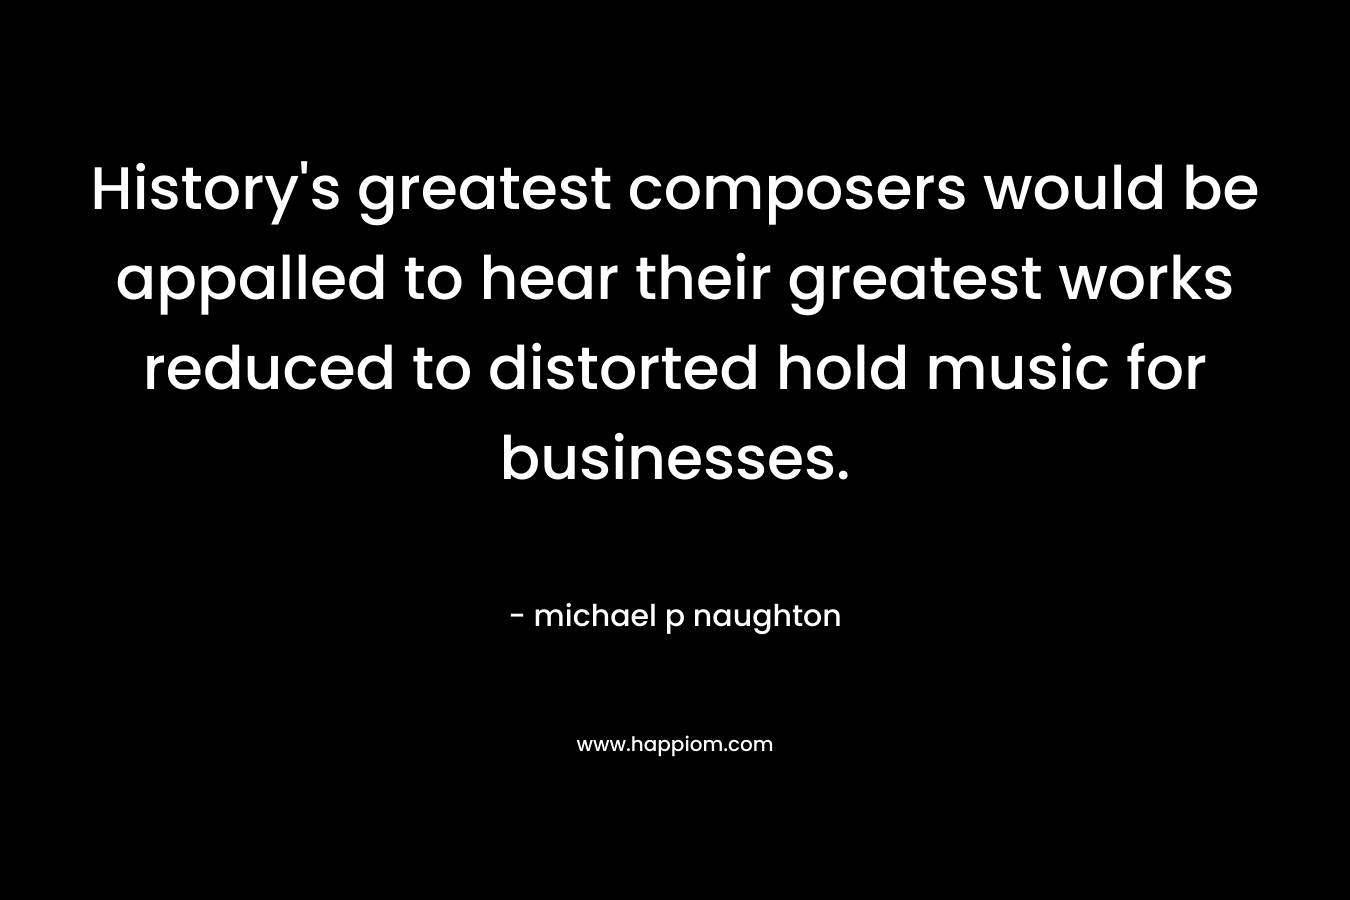 History’s greatest composers would be appalled to hear their greatest works reduced to distorted hold music for businesses. – michael p naughton